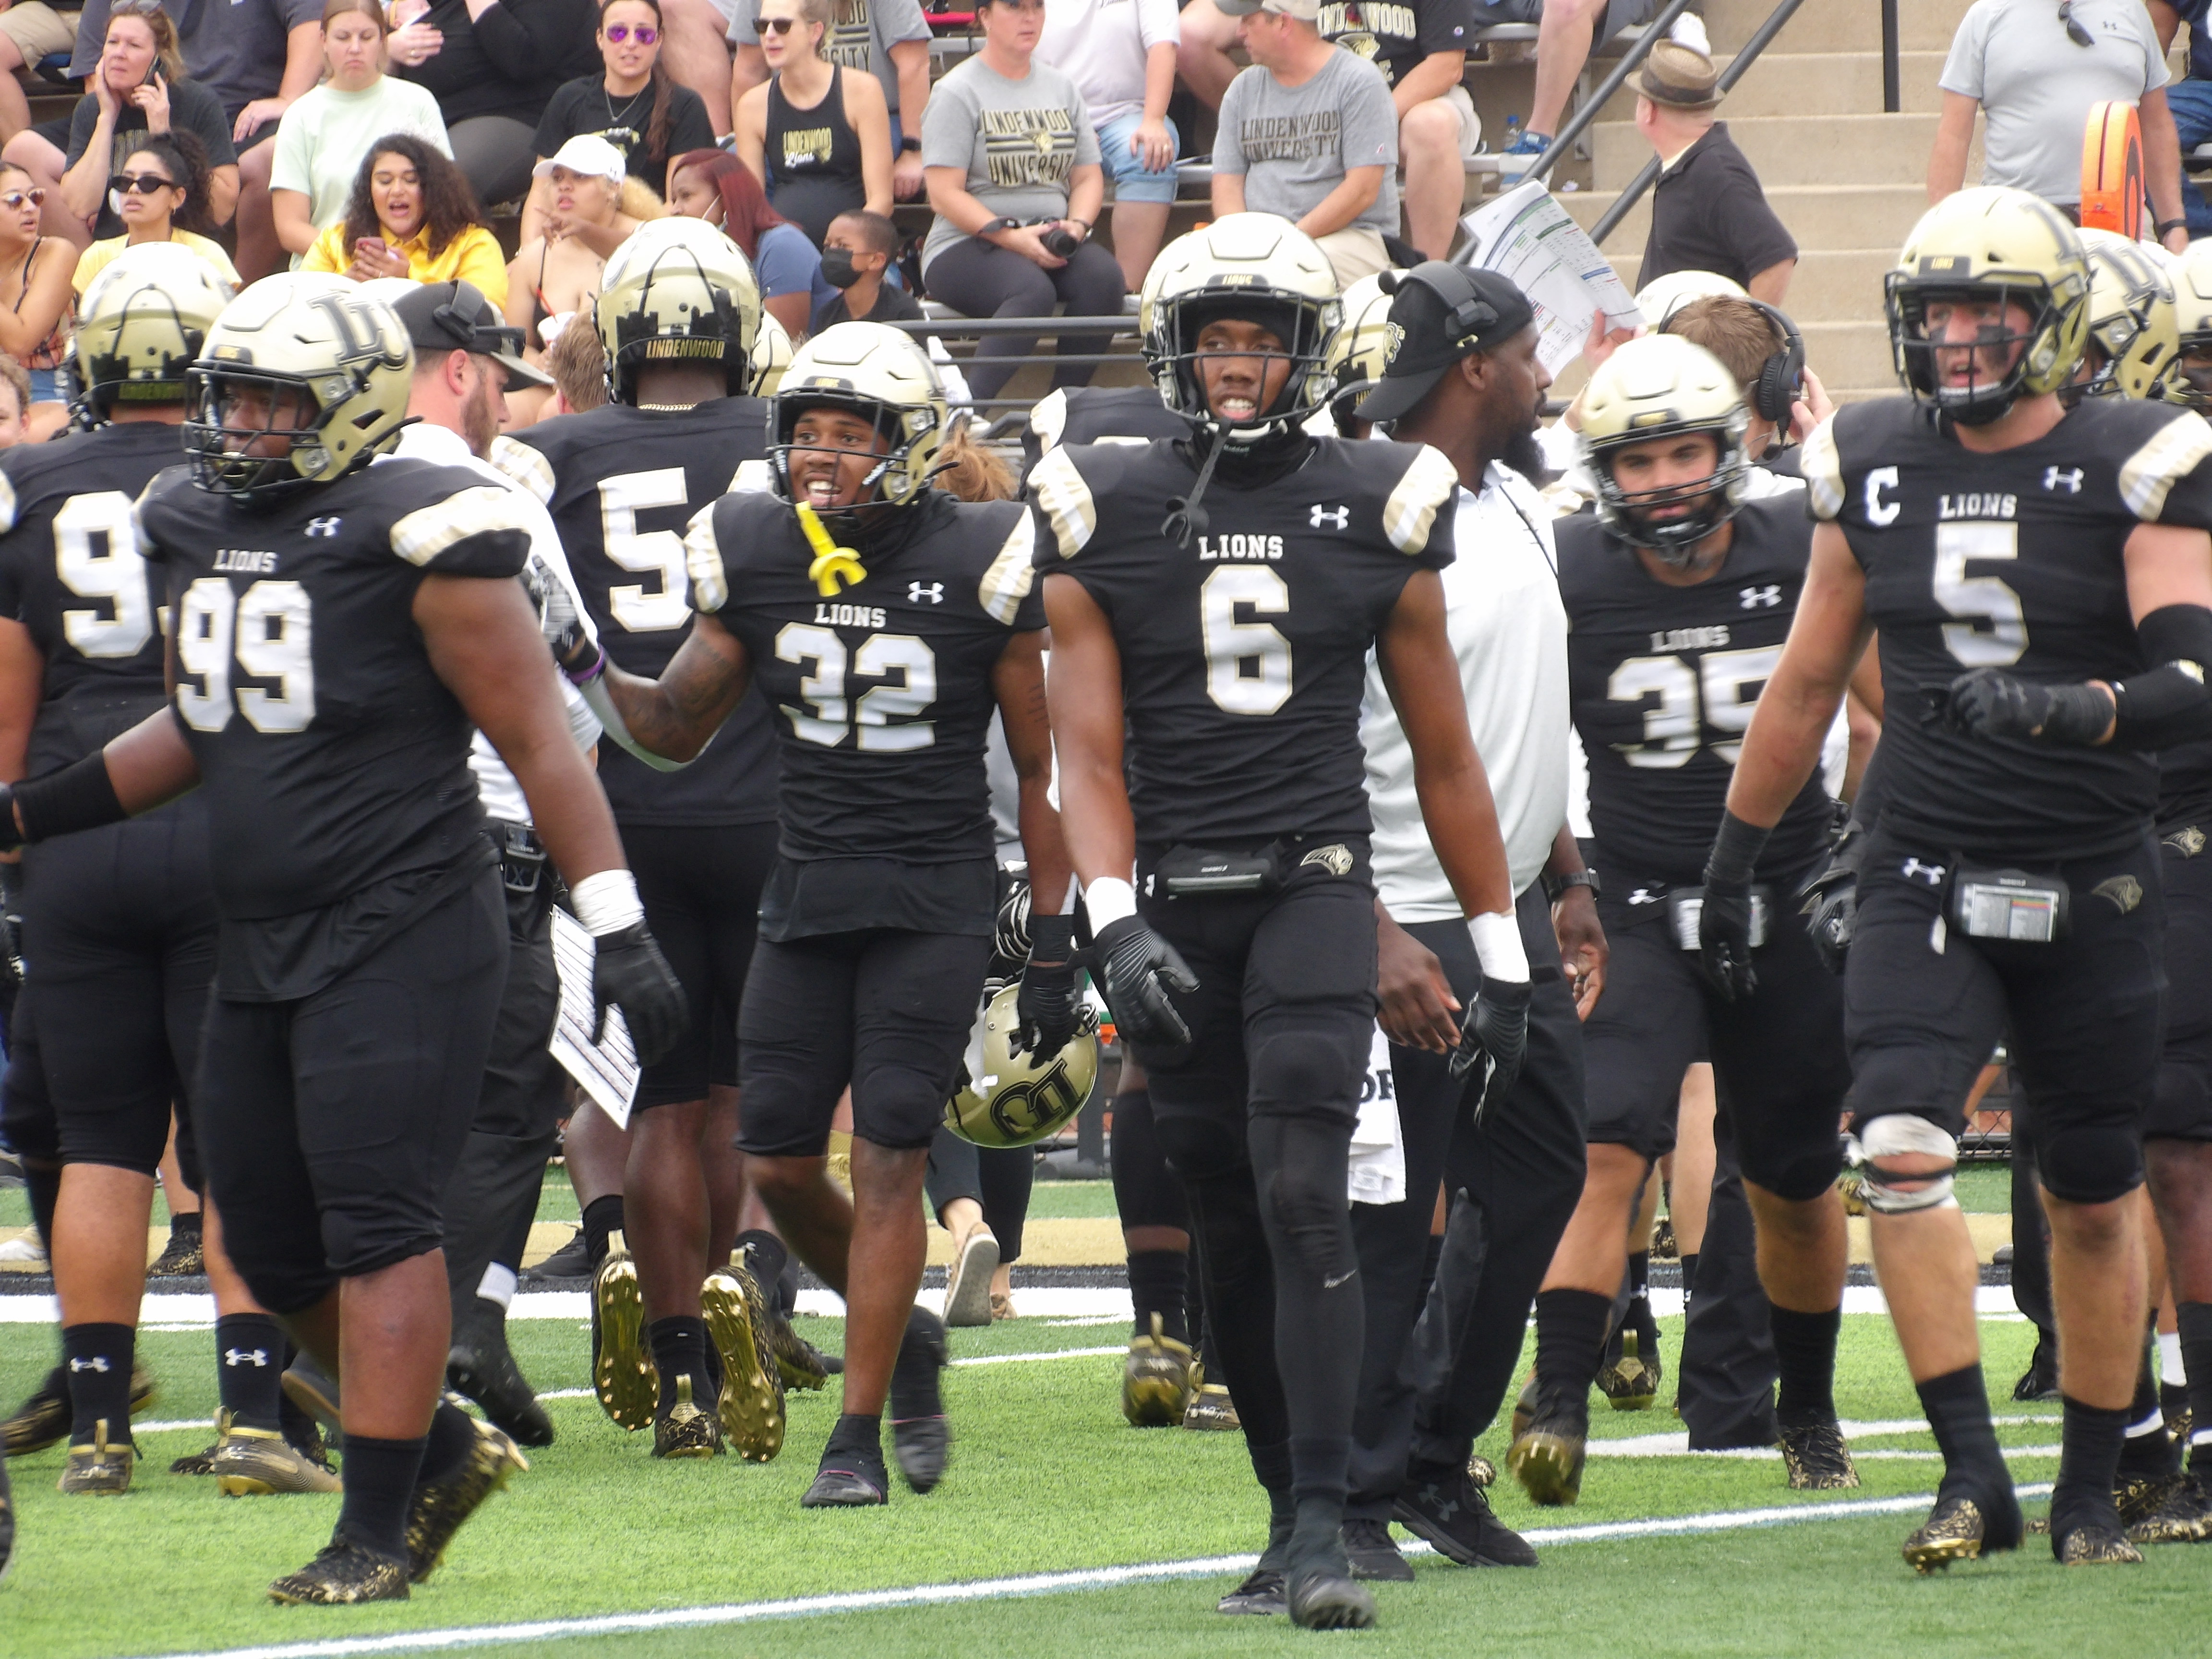 Gameday Preview: Lindenwood Headed On The Road For First Place Showdown With UIndy